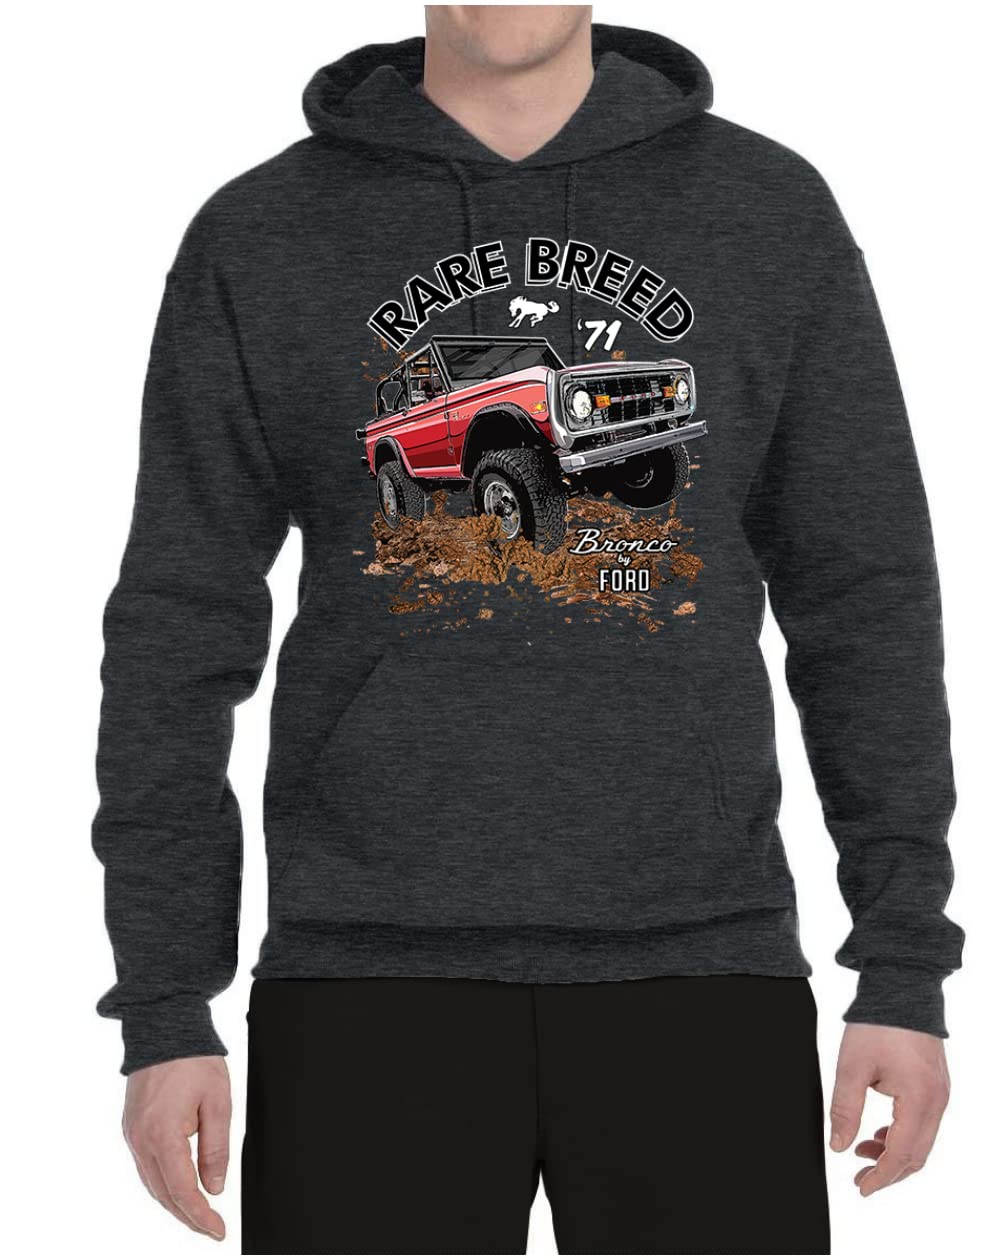 Wild Bobby Ford Rare Breed 71 Bronco Truck Classic Cars and Trucks Unisex Graphic Hoodie Sweatshirt, Heather Black, Large